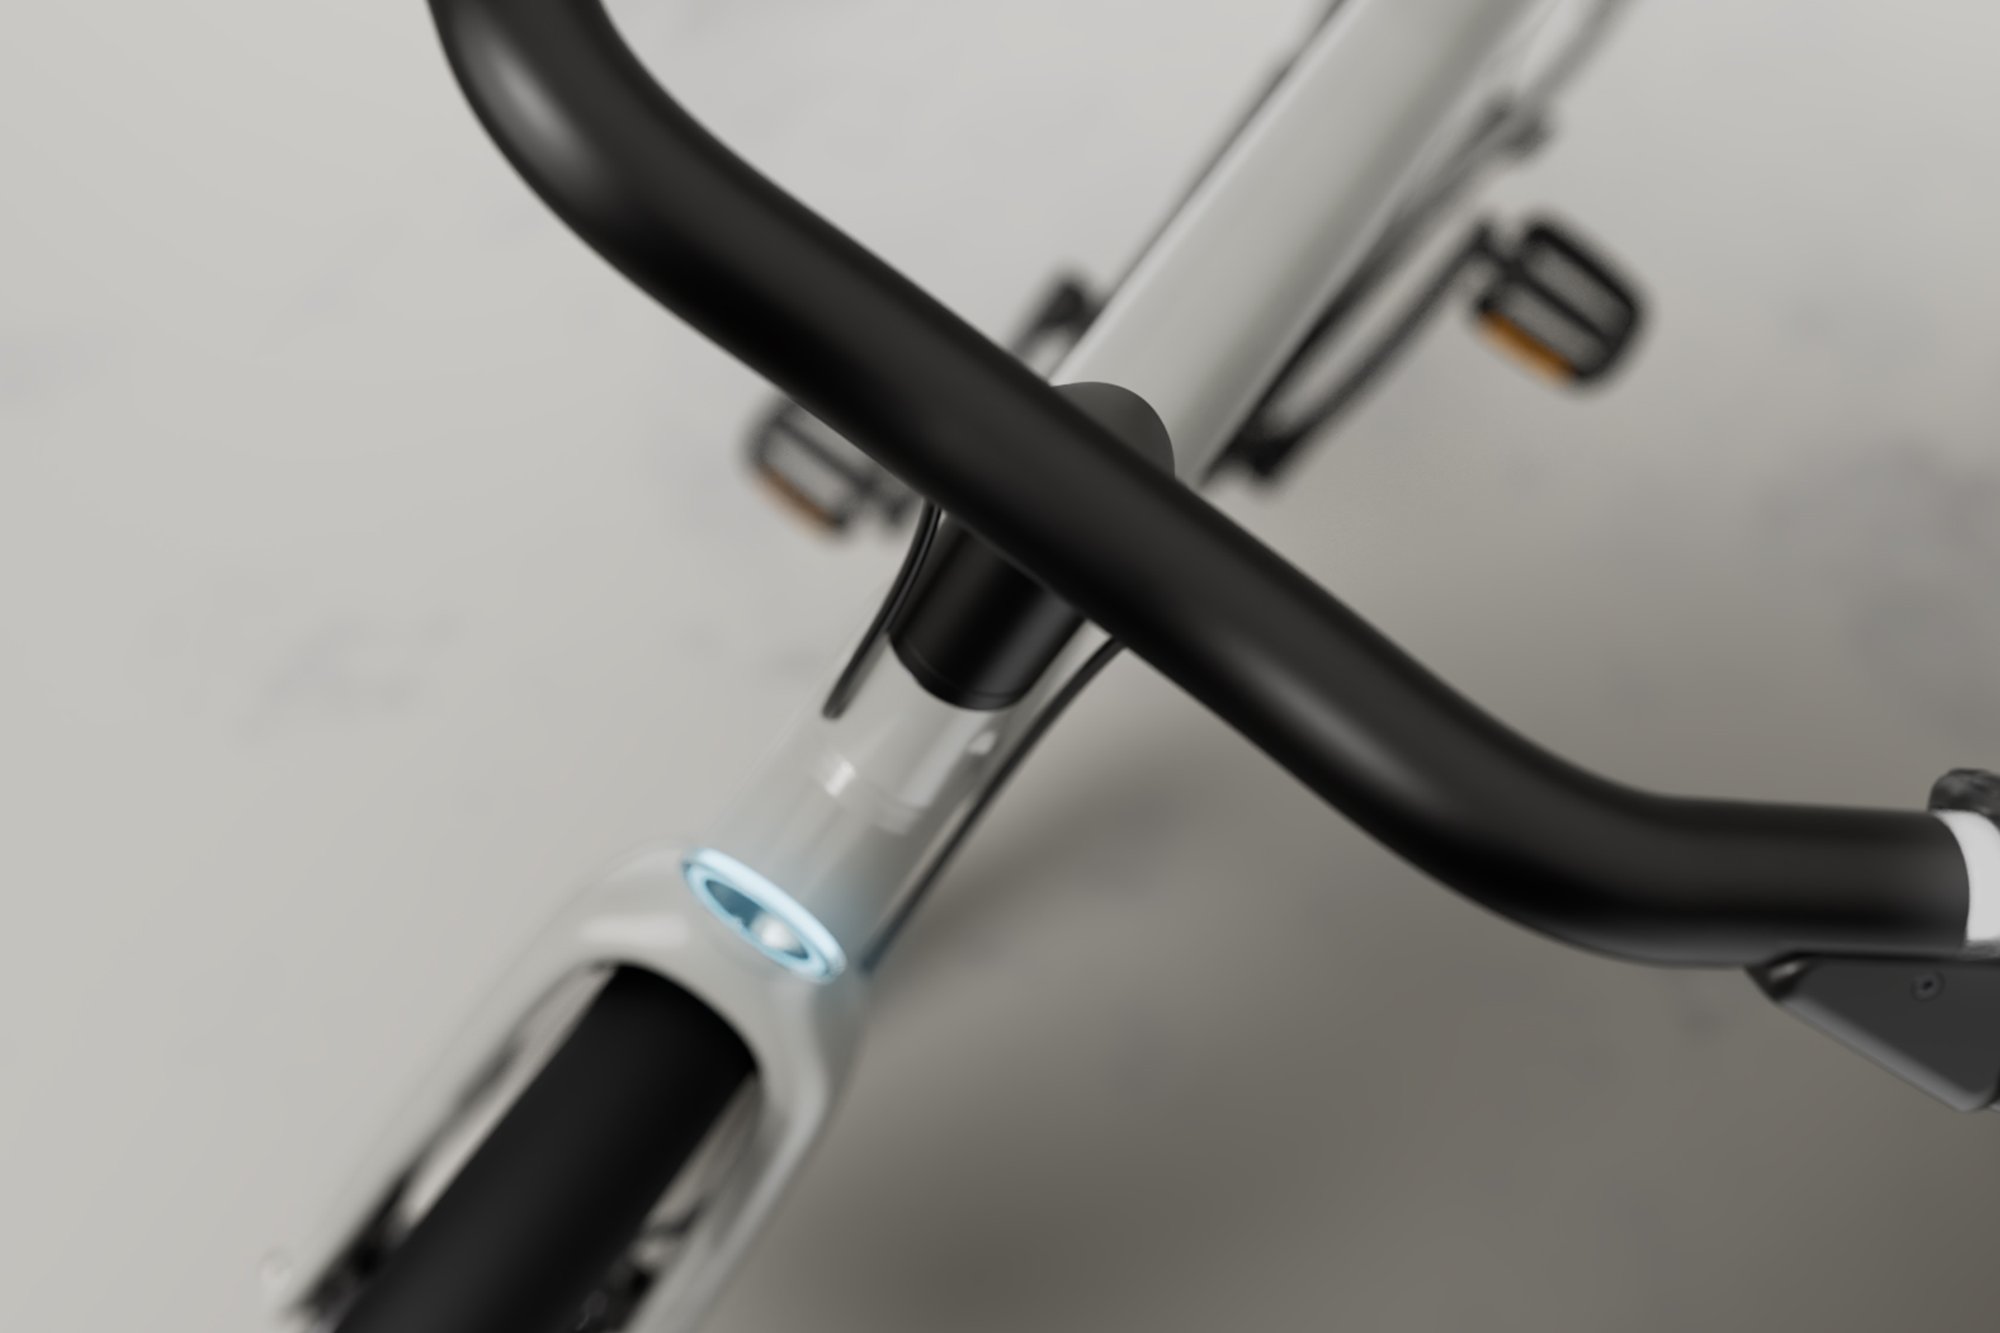 Detailing of VanMoof's new S5 &amp; A5 e-bikes